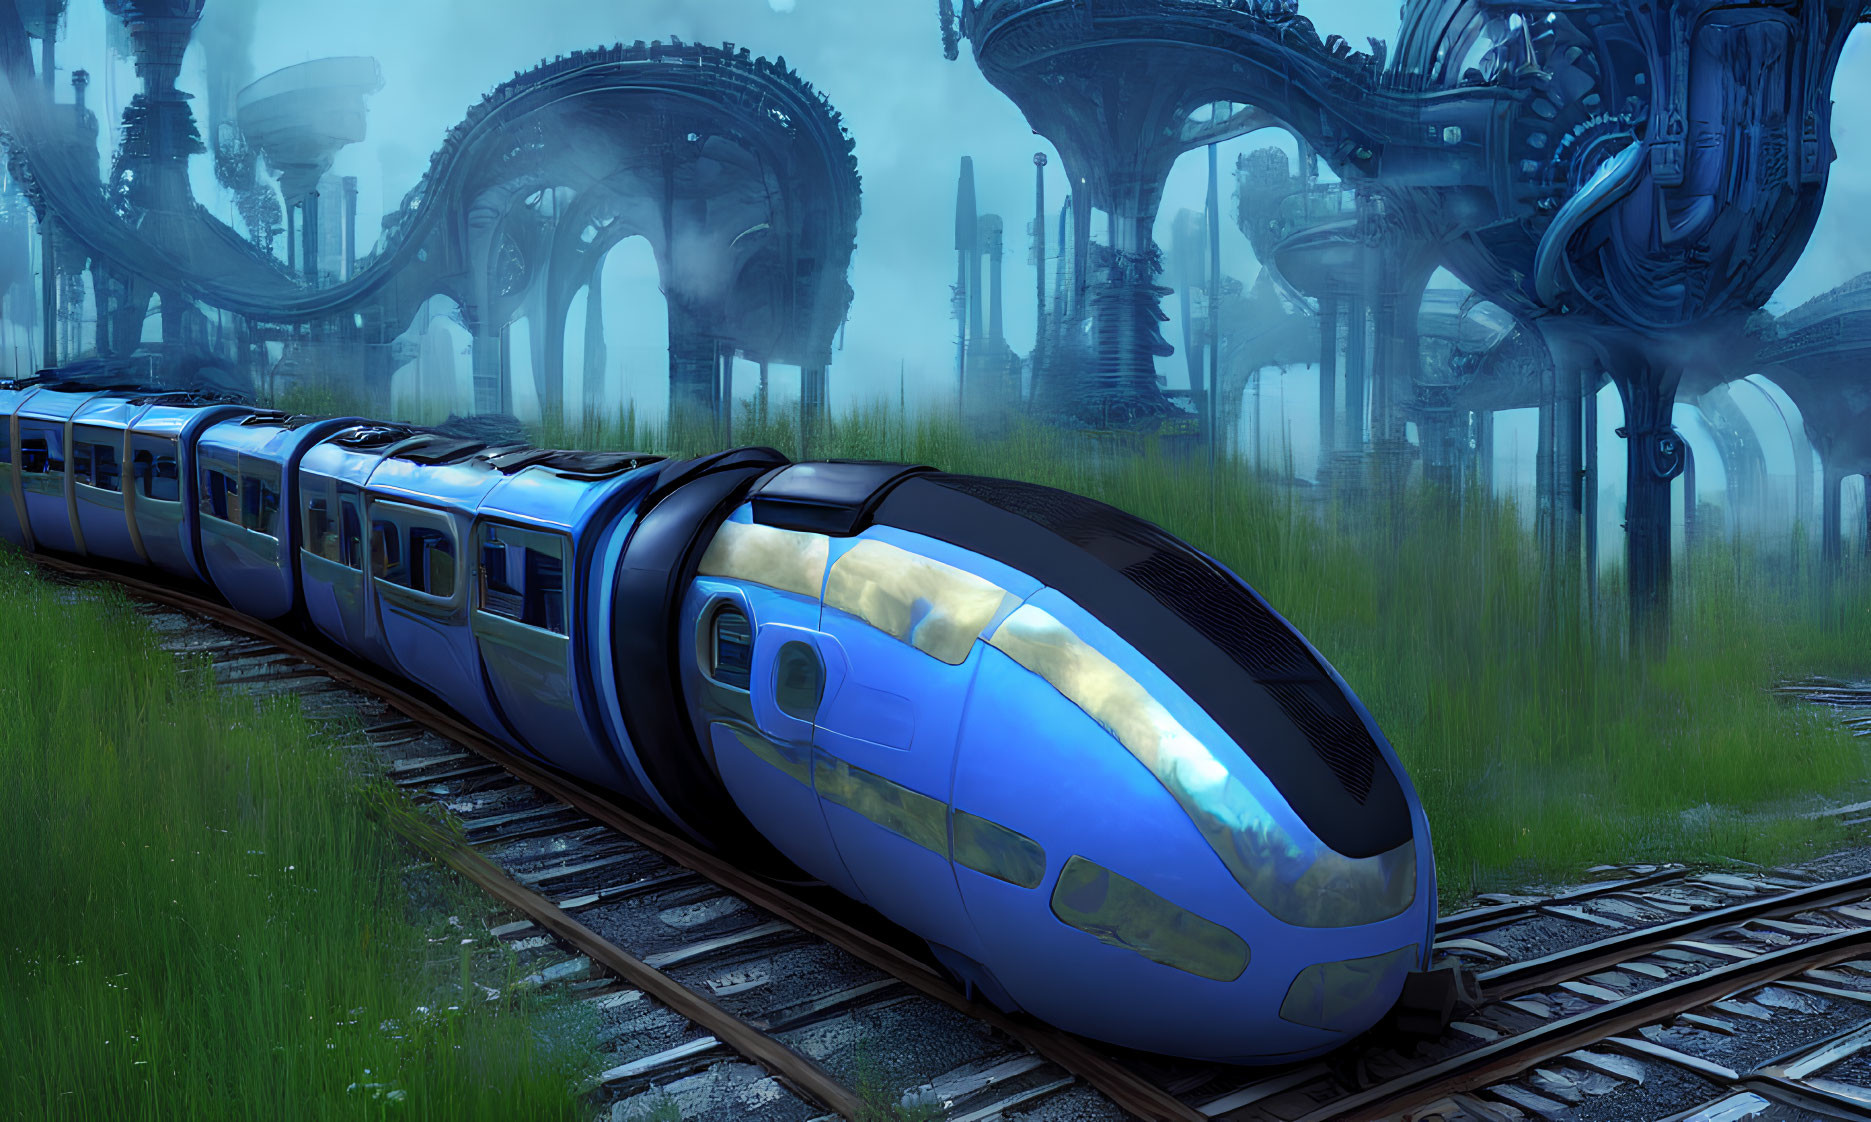 Futuristic blue train in misty sci-fi setting with metallic structures